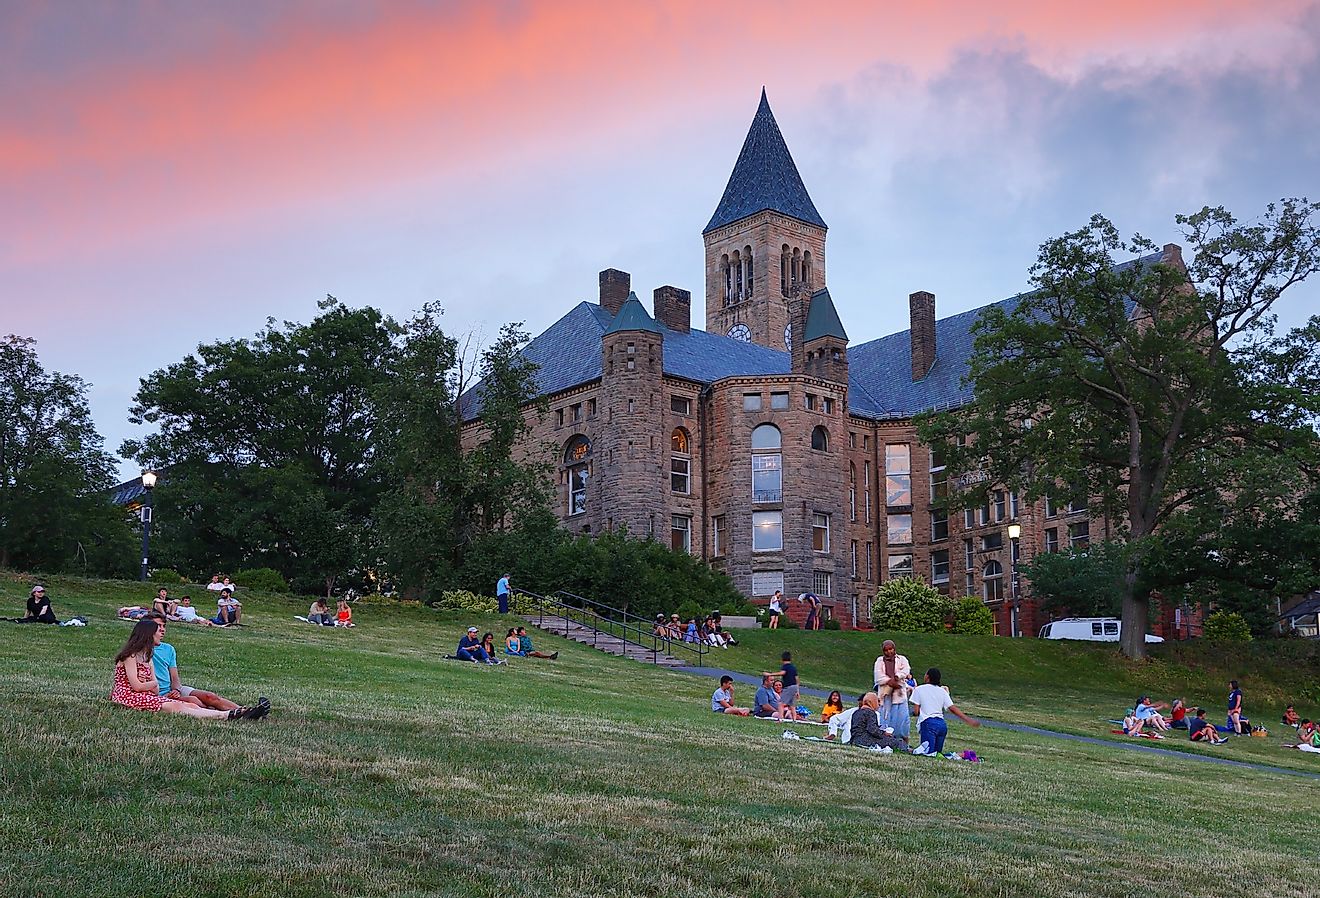 The Uris Library and McGraw Tower on campus of Cornell University in Ithaca, New York. Image credit Jay Yuan via Shutterstock